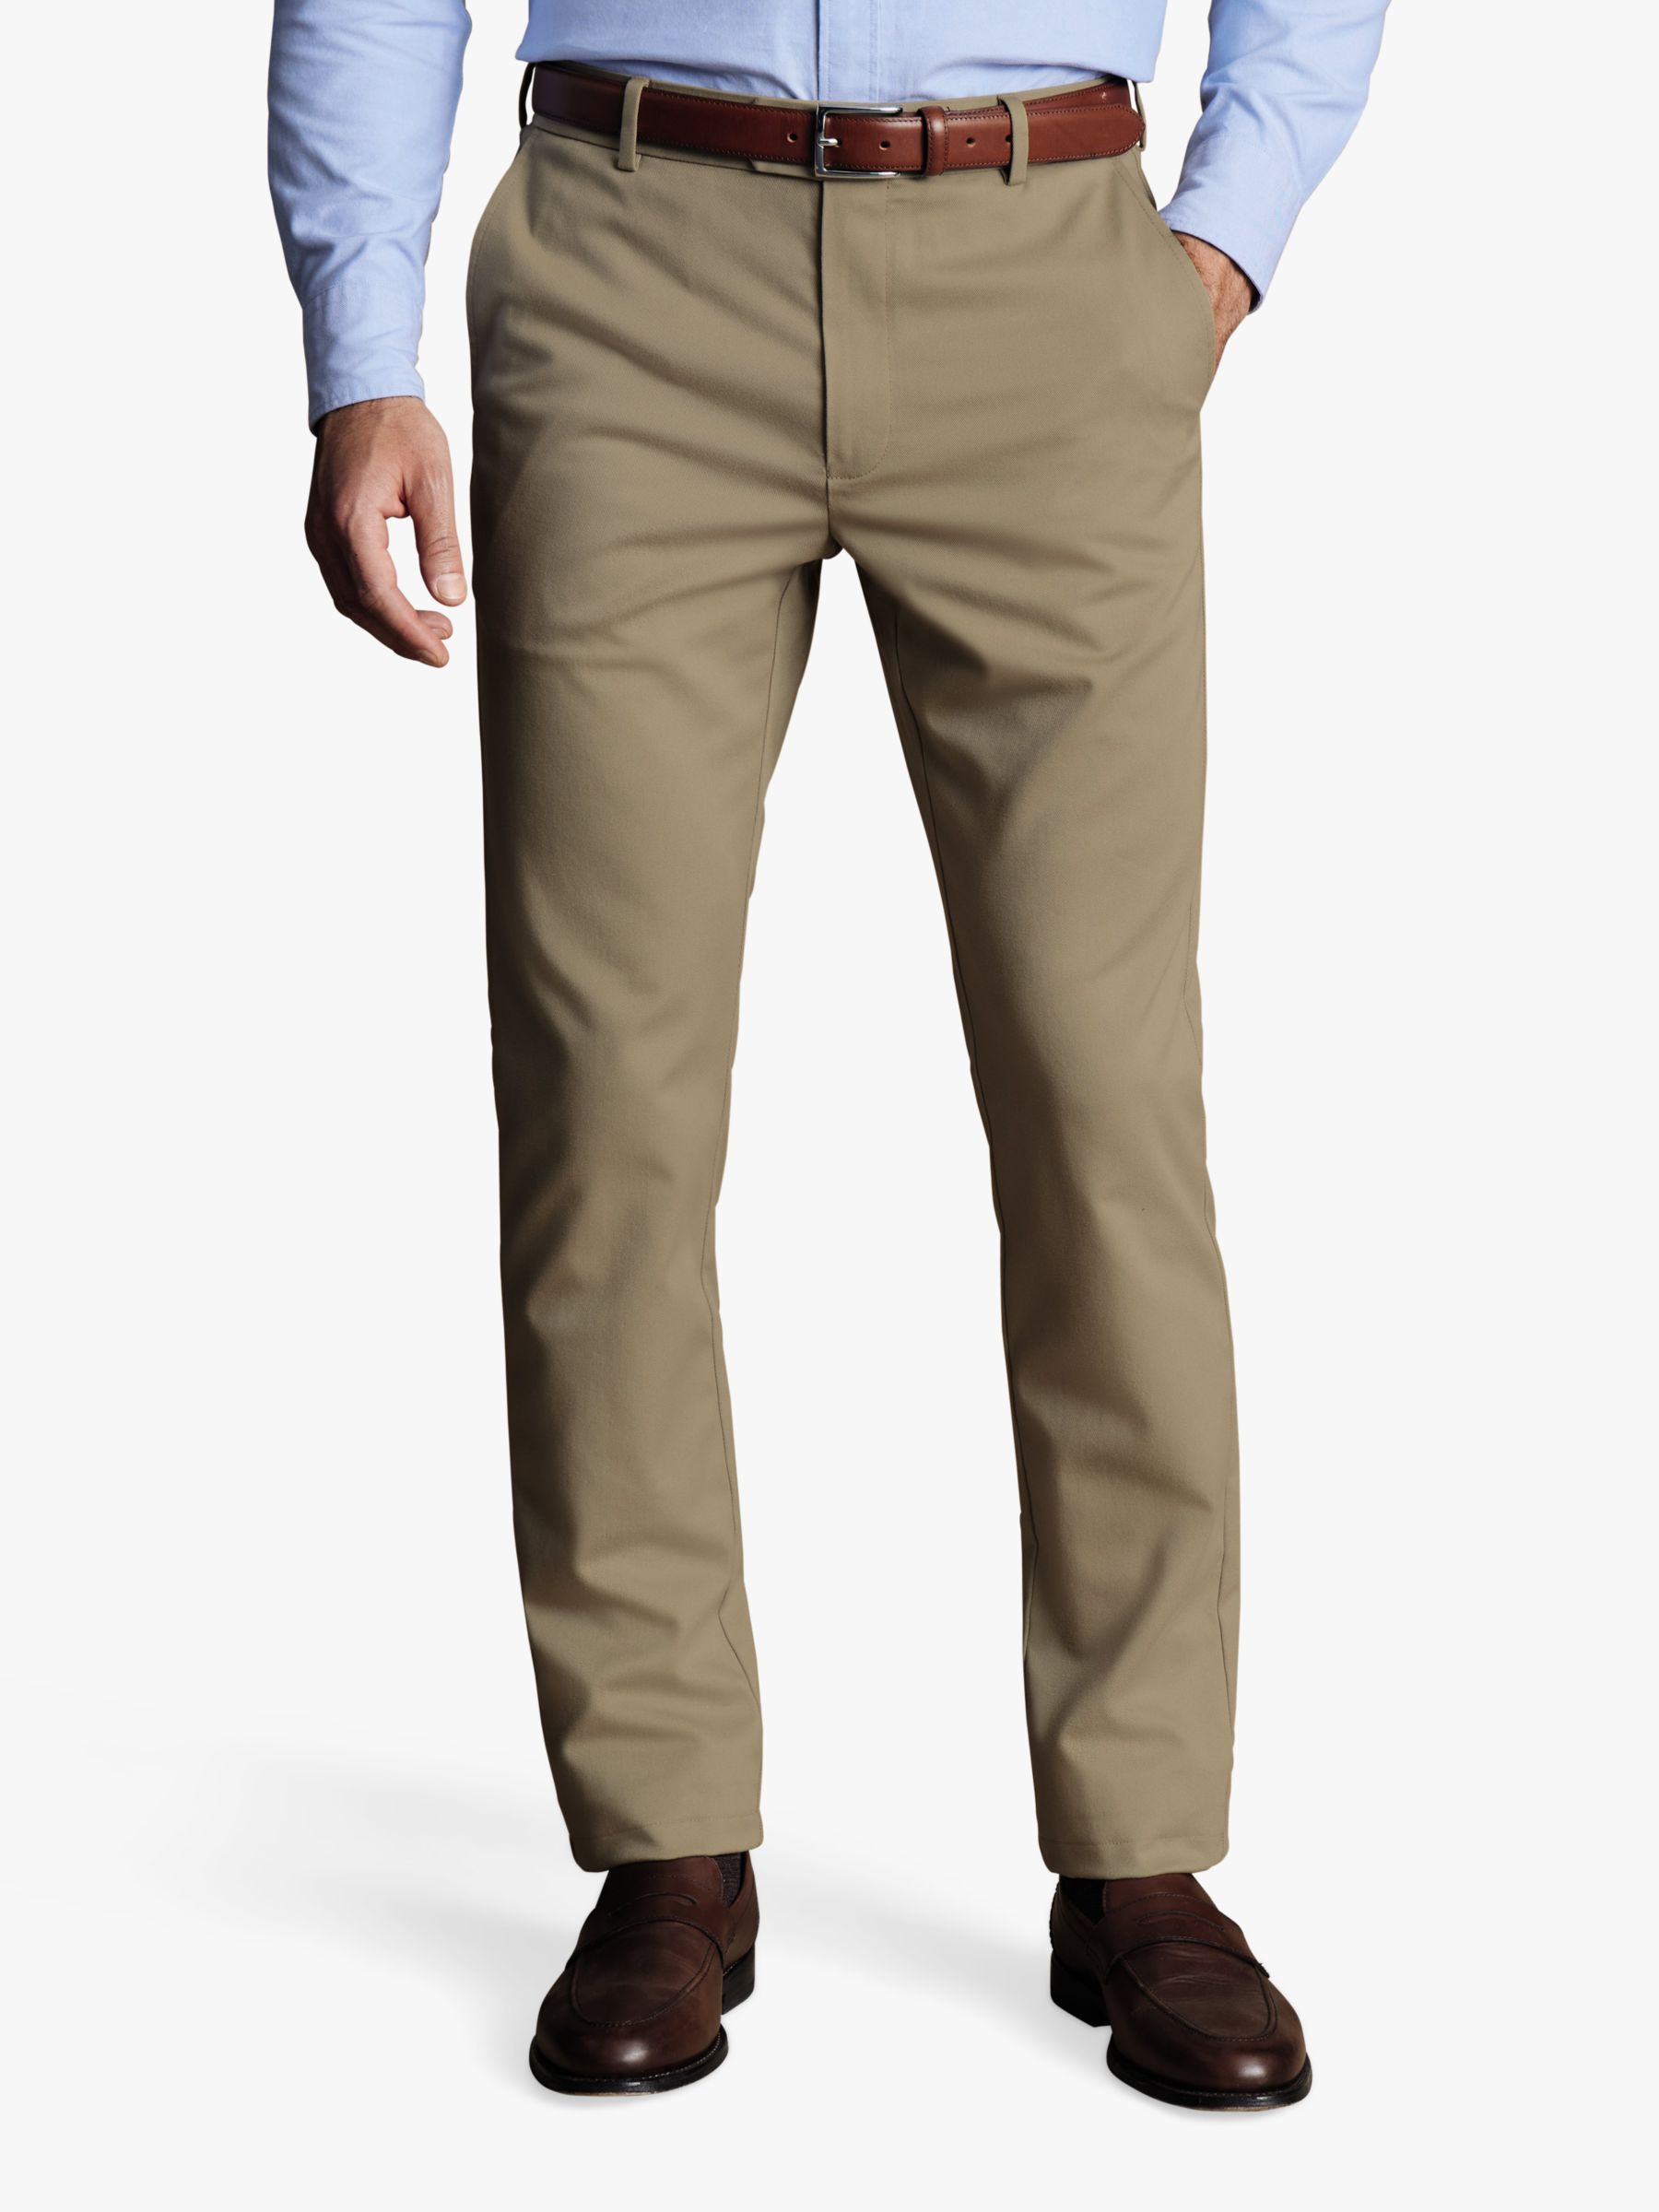 Charles Tyrwhitt Classic Fit Ultimate Non-Iron Chinos, Taupe, W32/L30